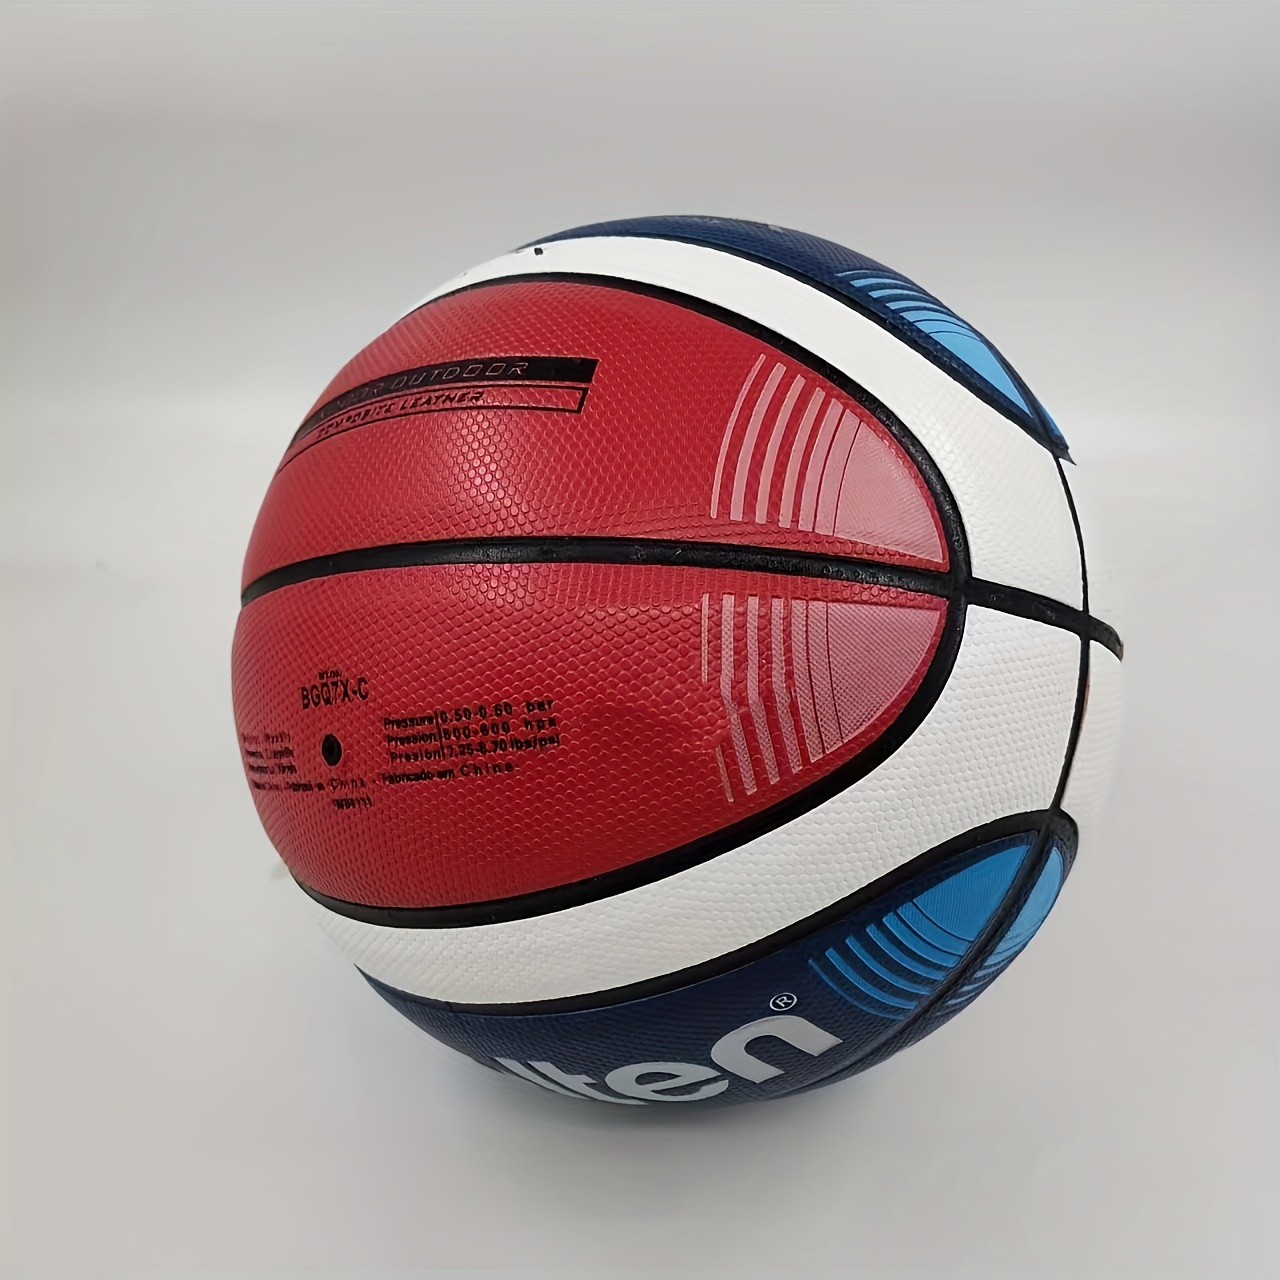 

1pc, Size 7 Sports Basketball, Wear-resistant And Durable Basketball, Suitable For Outdoor Indoor Training Competition